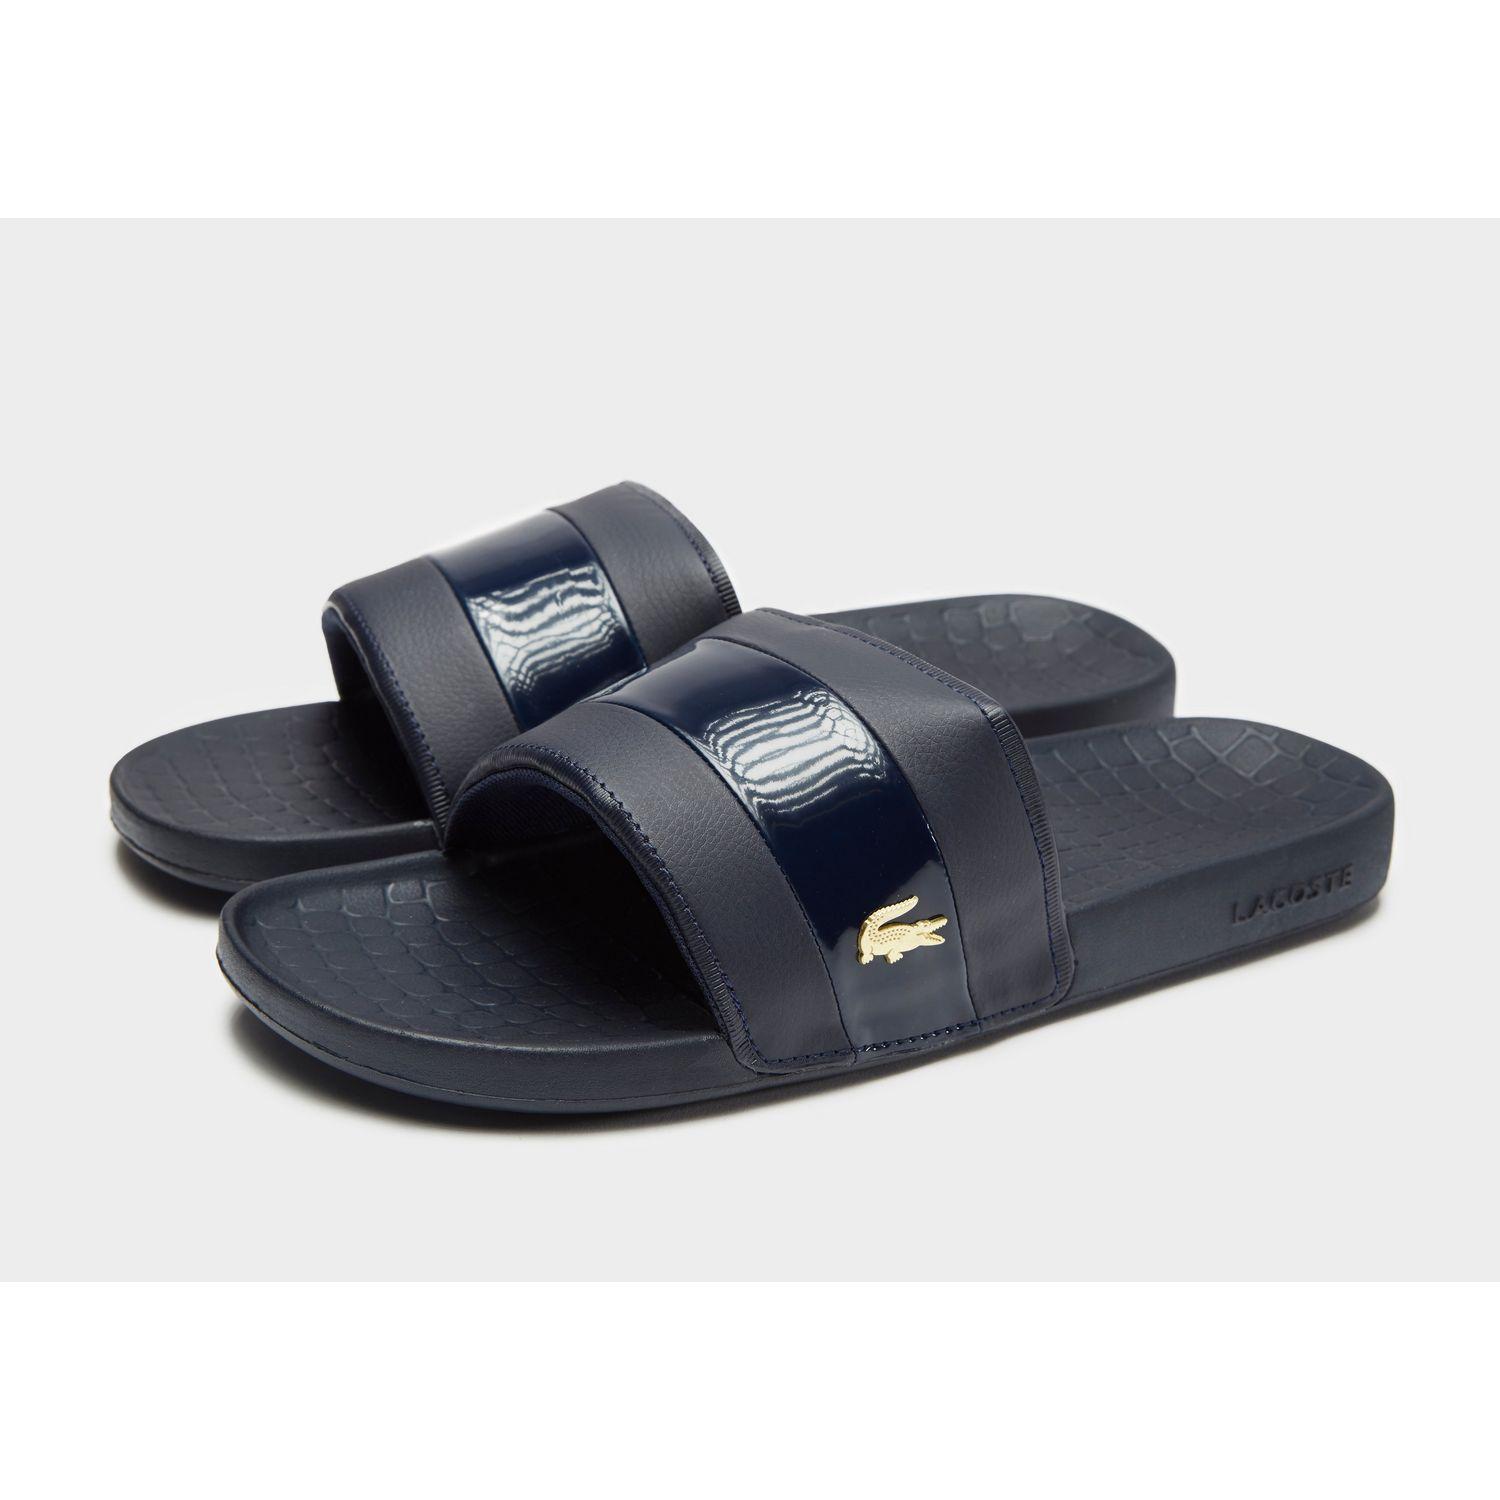 Lacoste Frasier Deluxe Slides Discount, SAVE 58%.